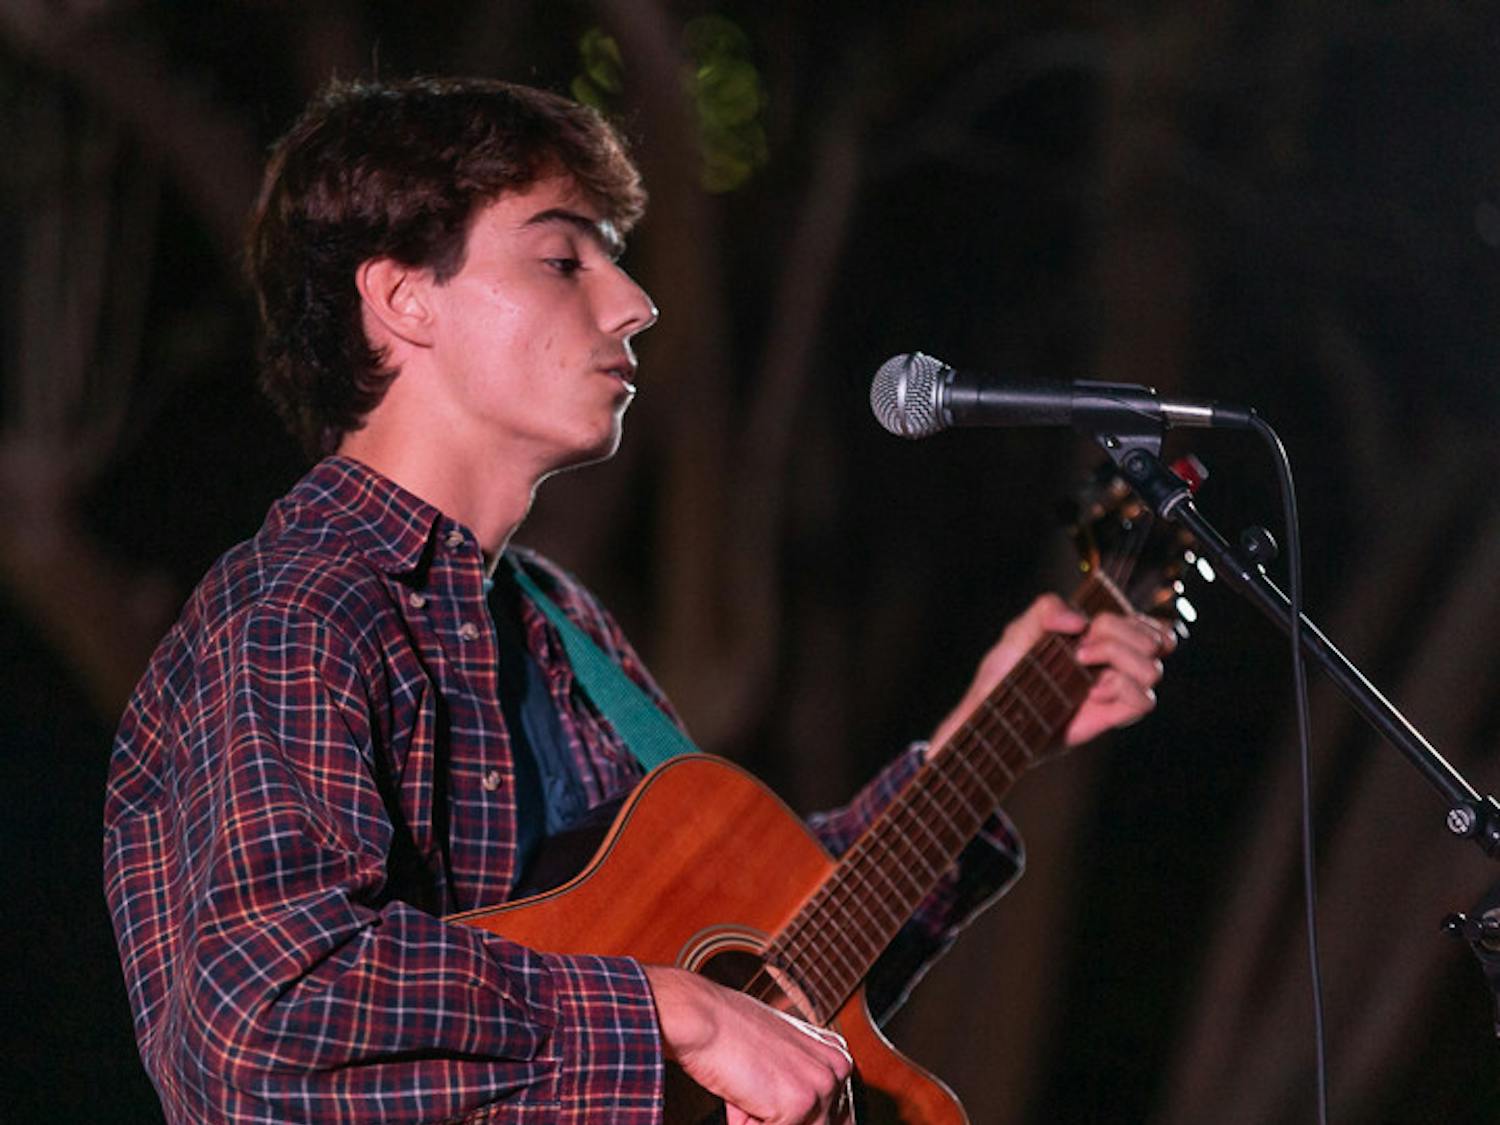 Second-year media arts student Henry Wood, guitarist for Henry and the Sleepers, during his set at the Battle of the Bands on Oct. 5, 2022. The folk band competed for a spot to play at the UofSC Homecoming Block Party on Oct. 28, 2022.